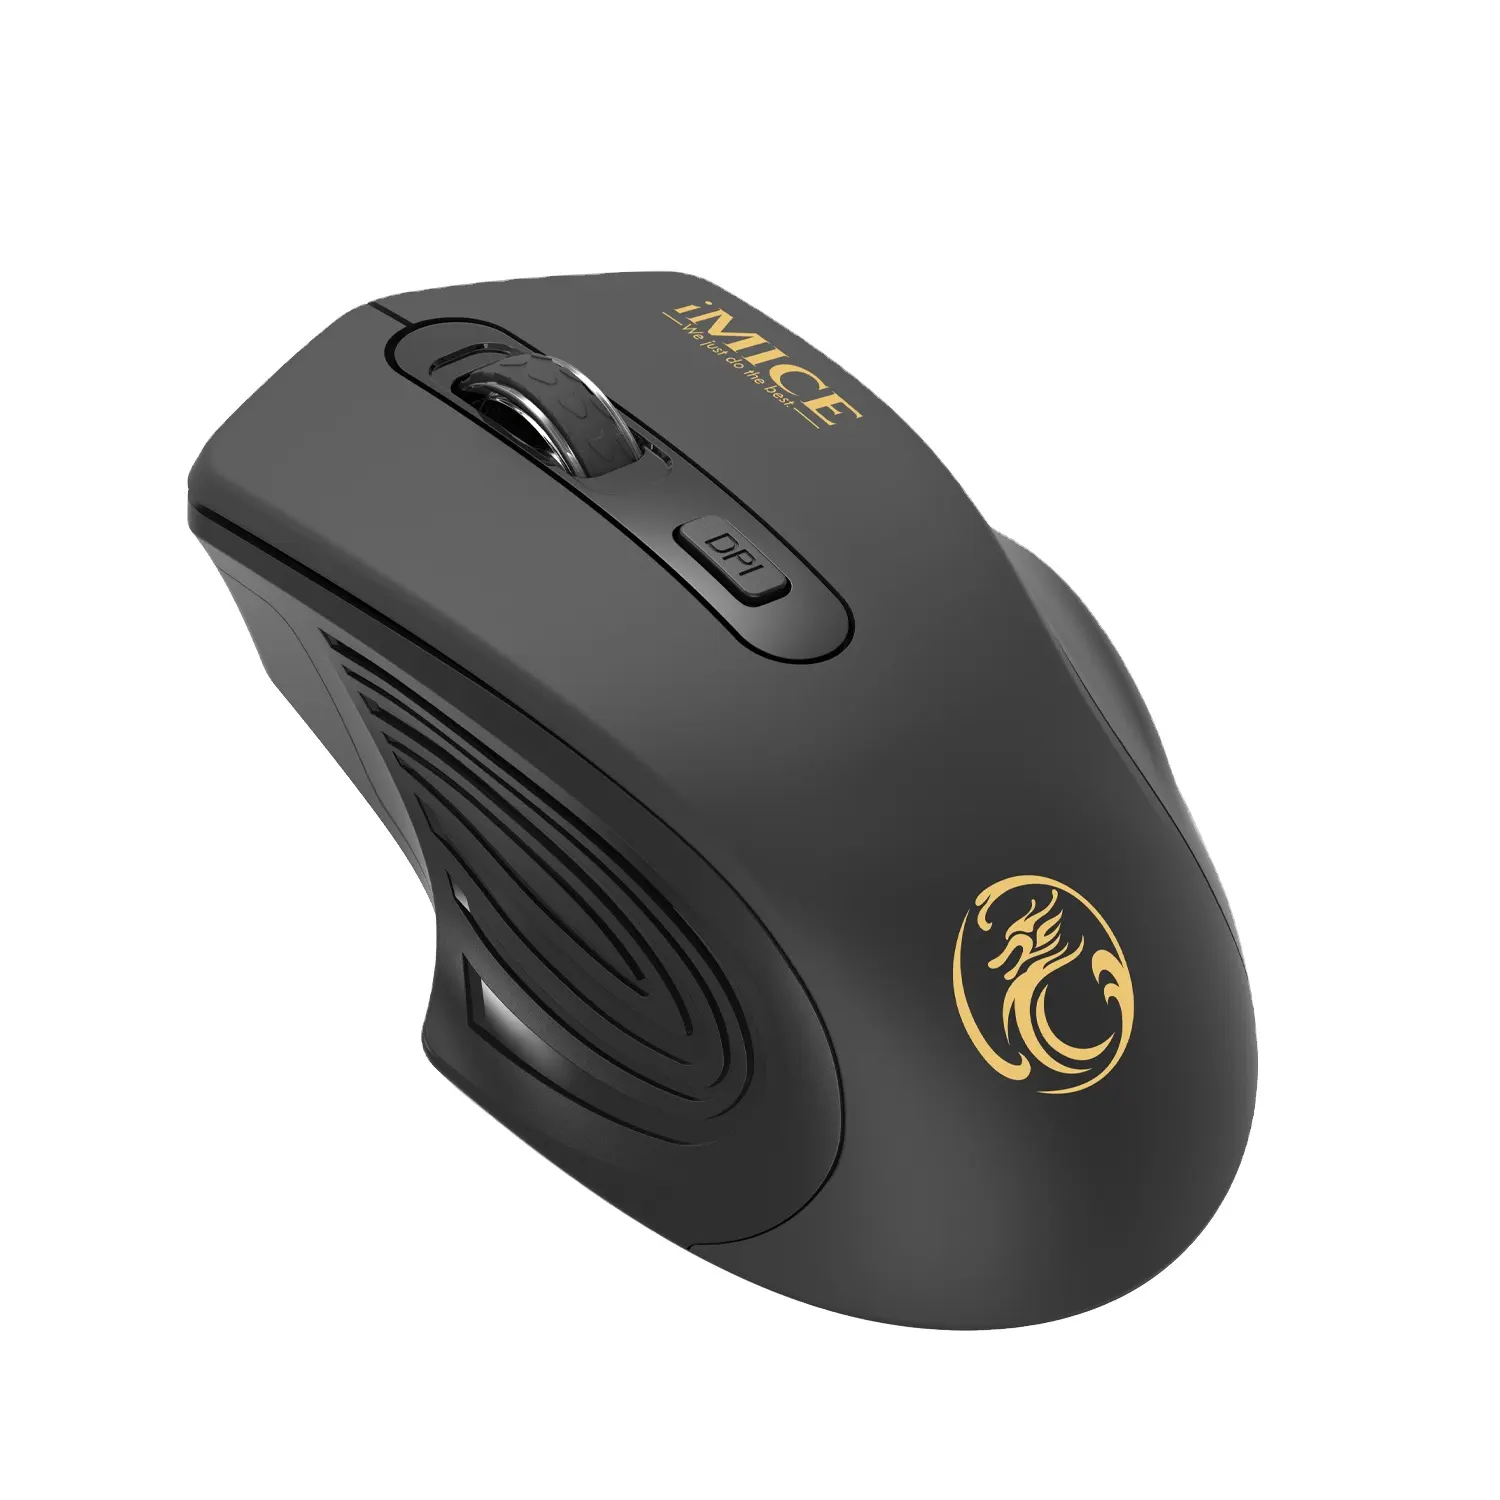 IMICE G1800 Optical 2.4Ghz Wireless Mouse for Home Office Use with Usb dongle